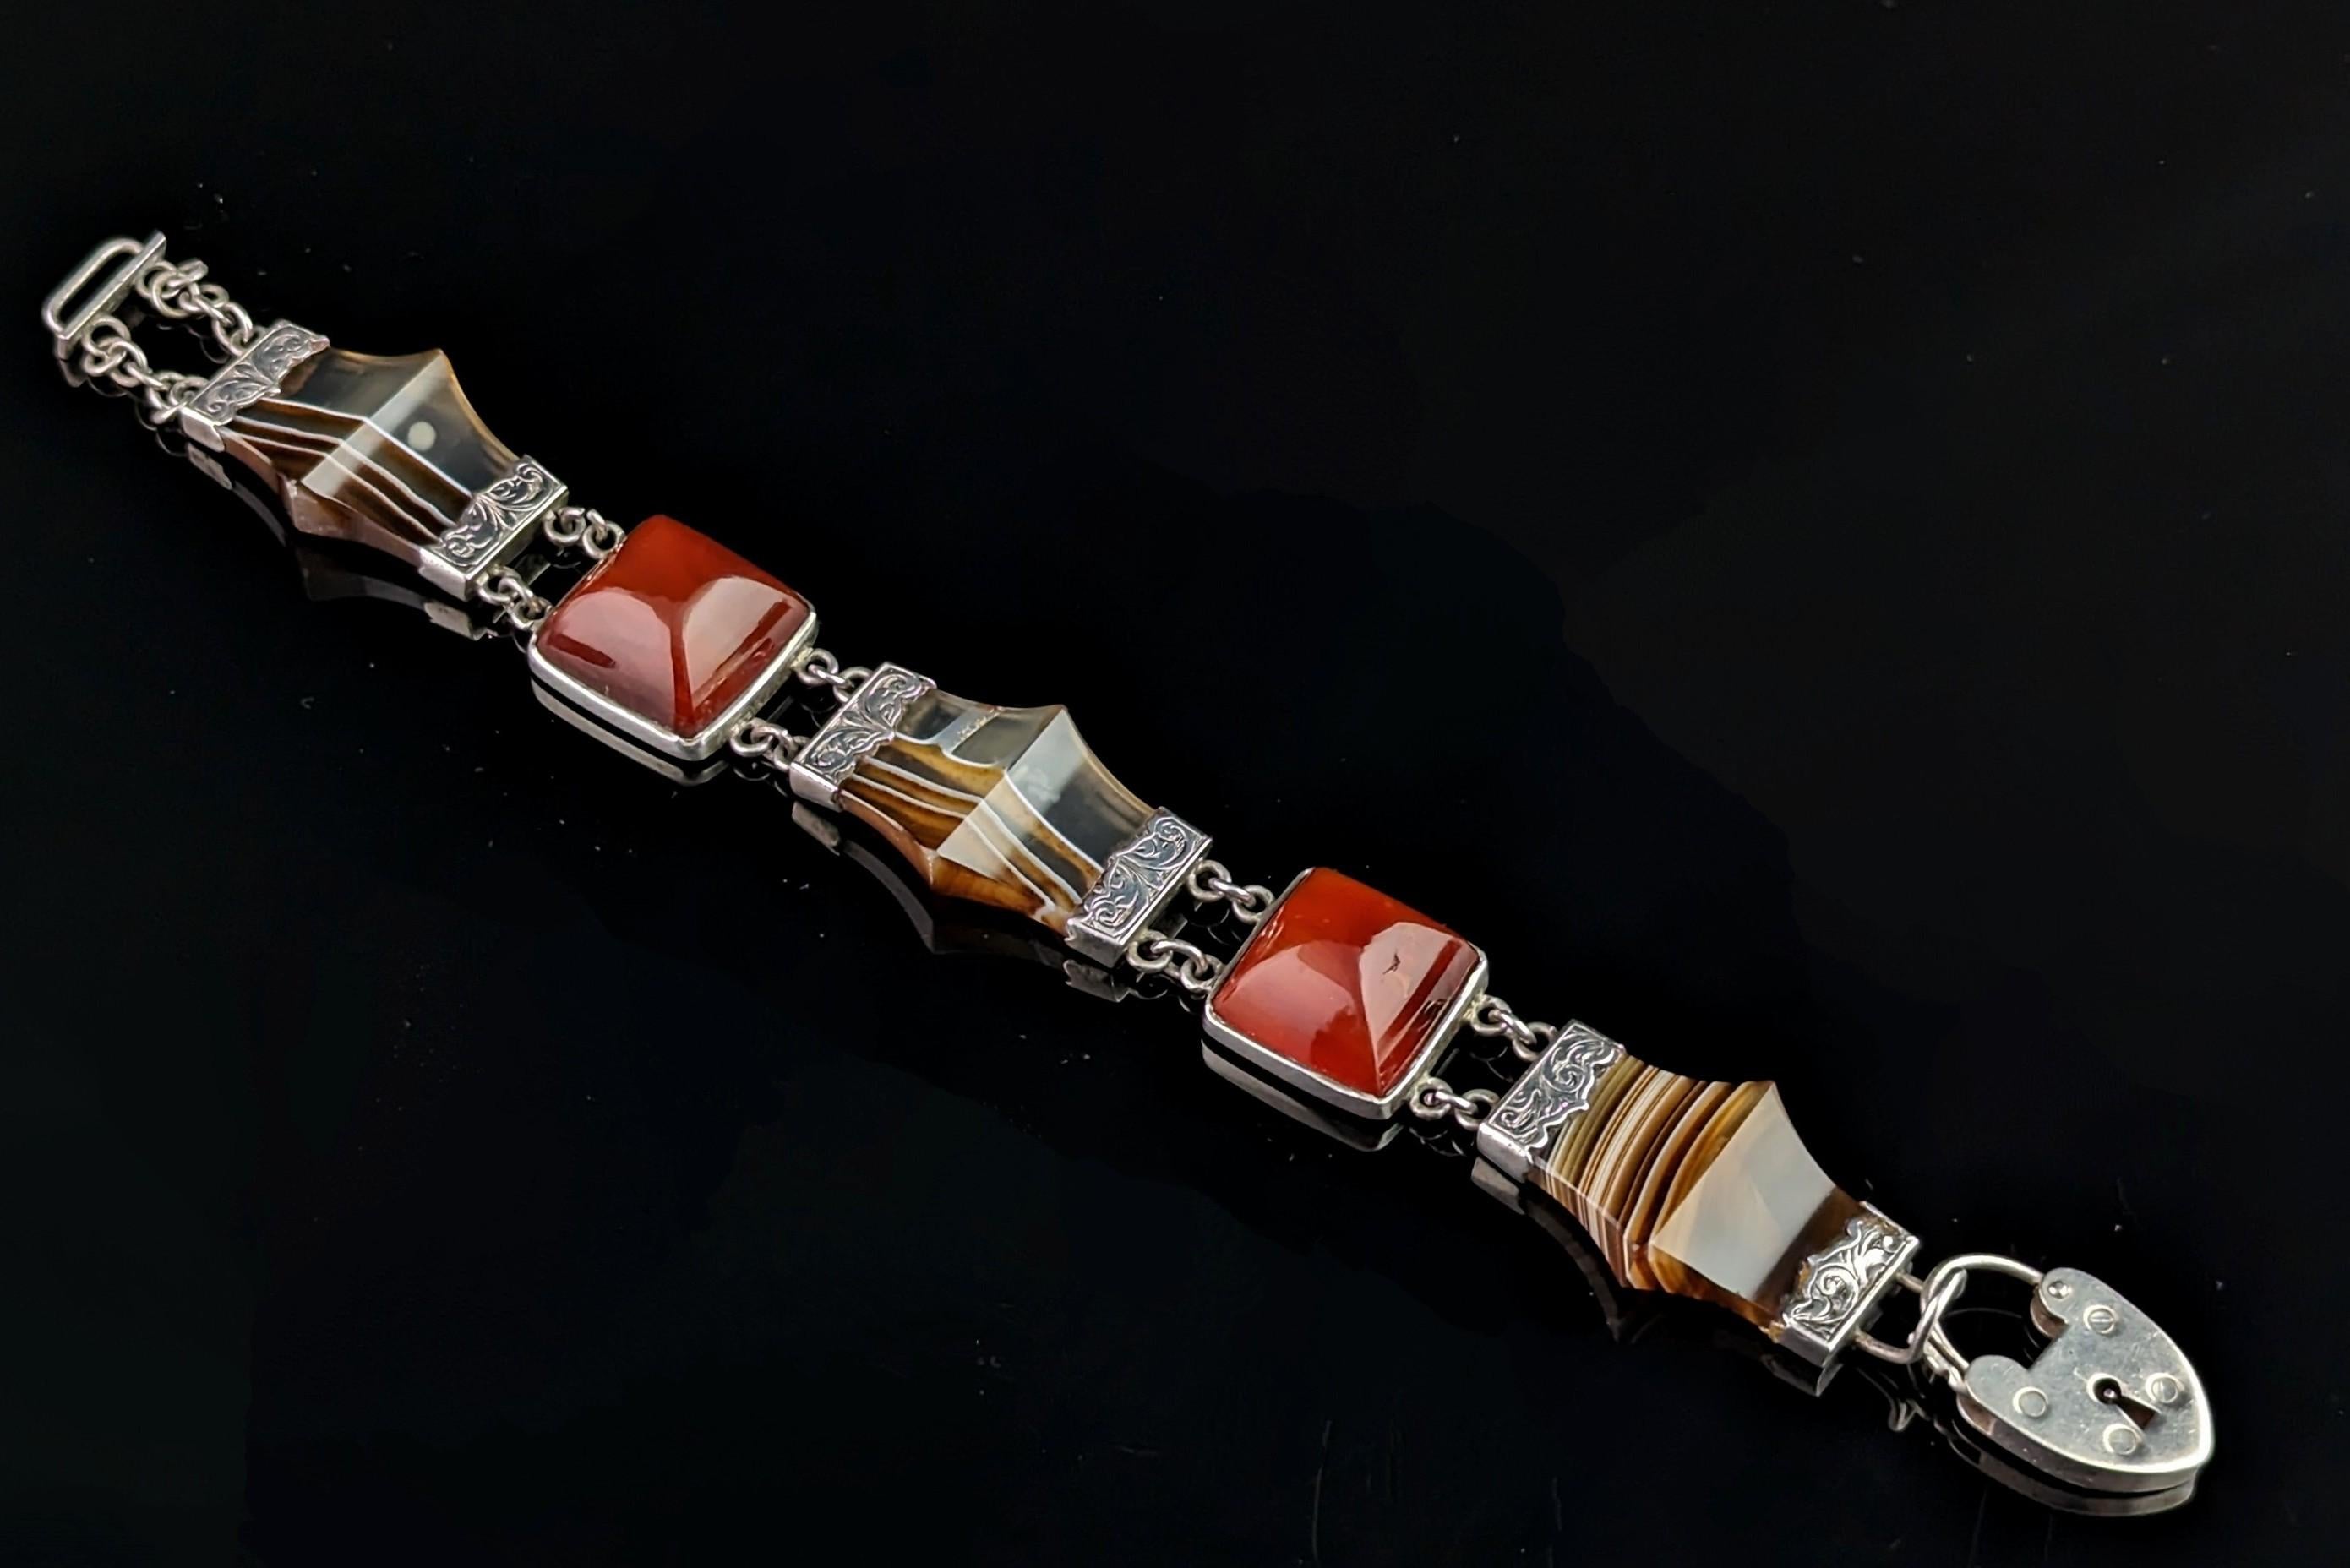 This stunning antique, mid Victorian era Scottish agate and Silver bracelet is really something else.

The bracelet features beautifully faceted panels of polished banded agate each with engraved silver end caps, each of these is intercepted by fine